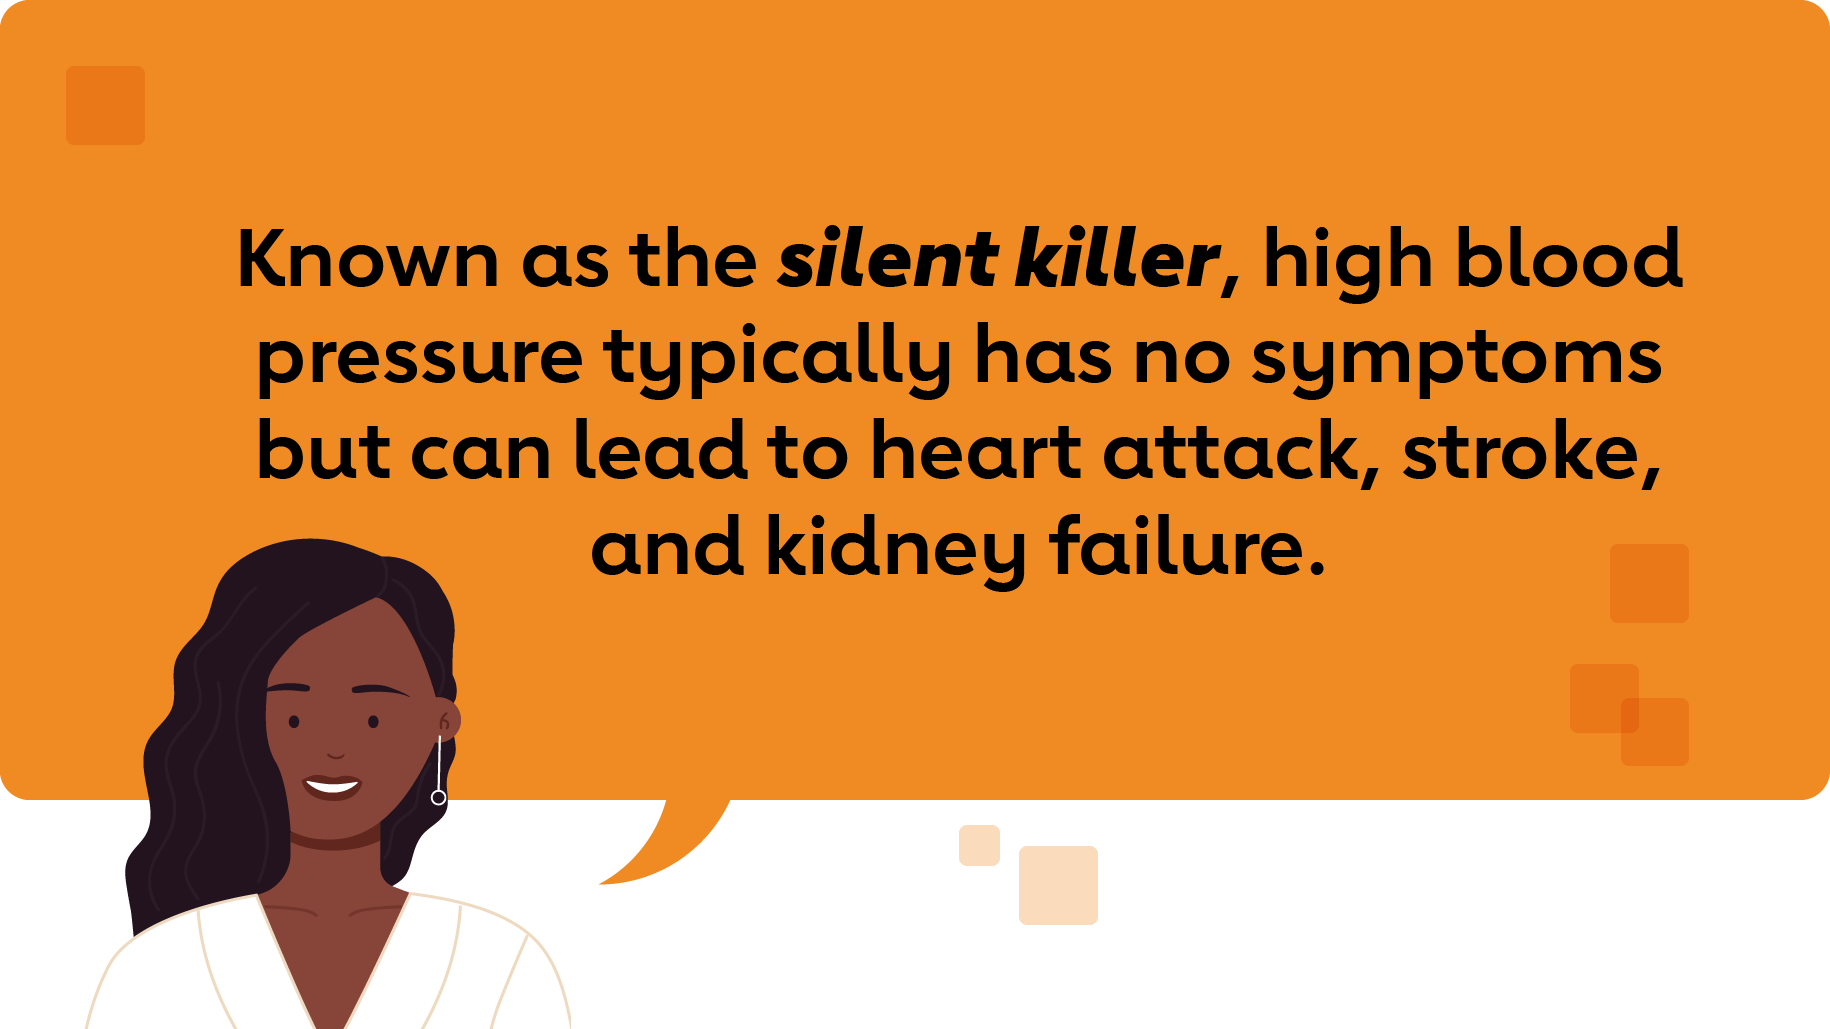 Known as the silent killer, high blood pressure typically has no symptoms but can lead to heart attack, stroke and kidney failure.